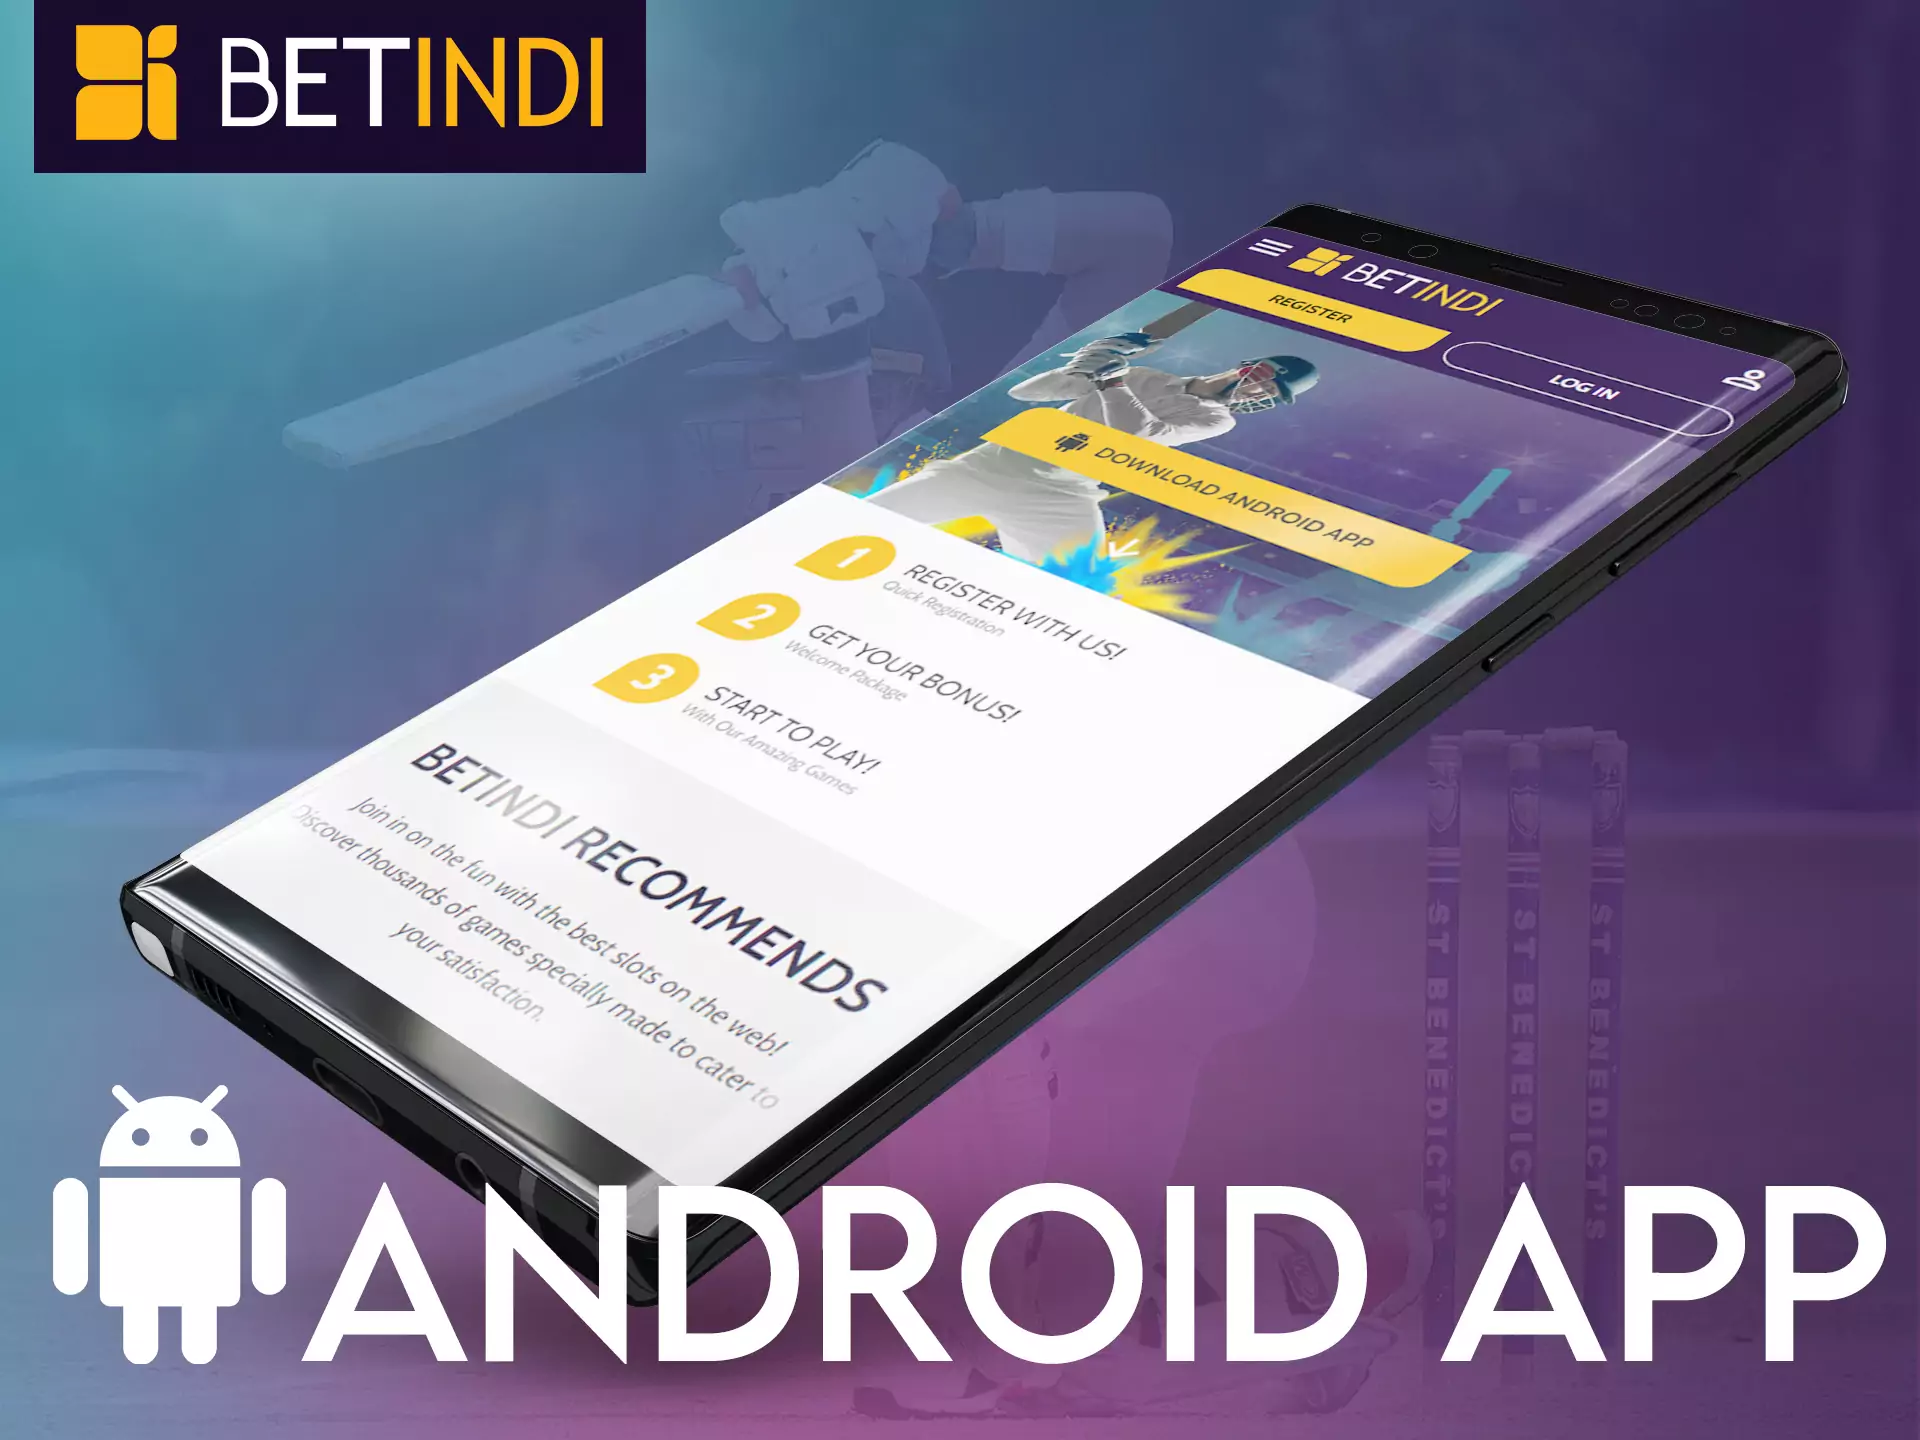 Betindi offers its users to use the app on their Android devices.